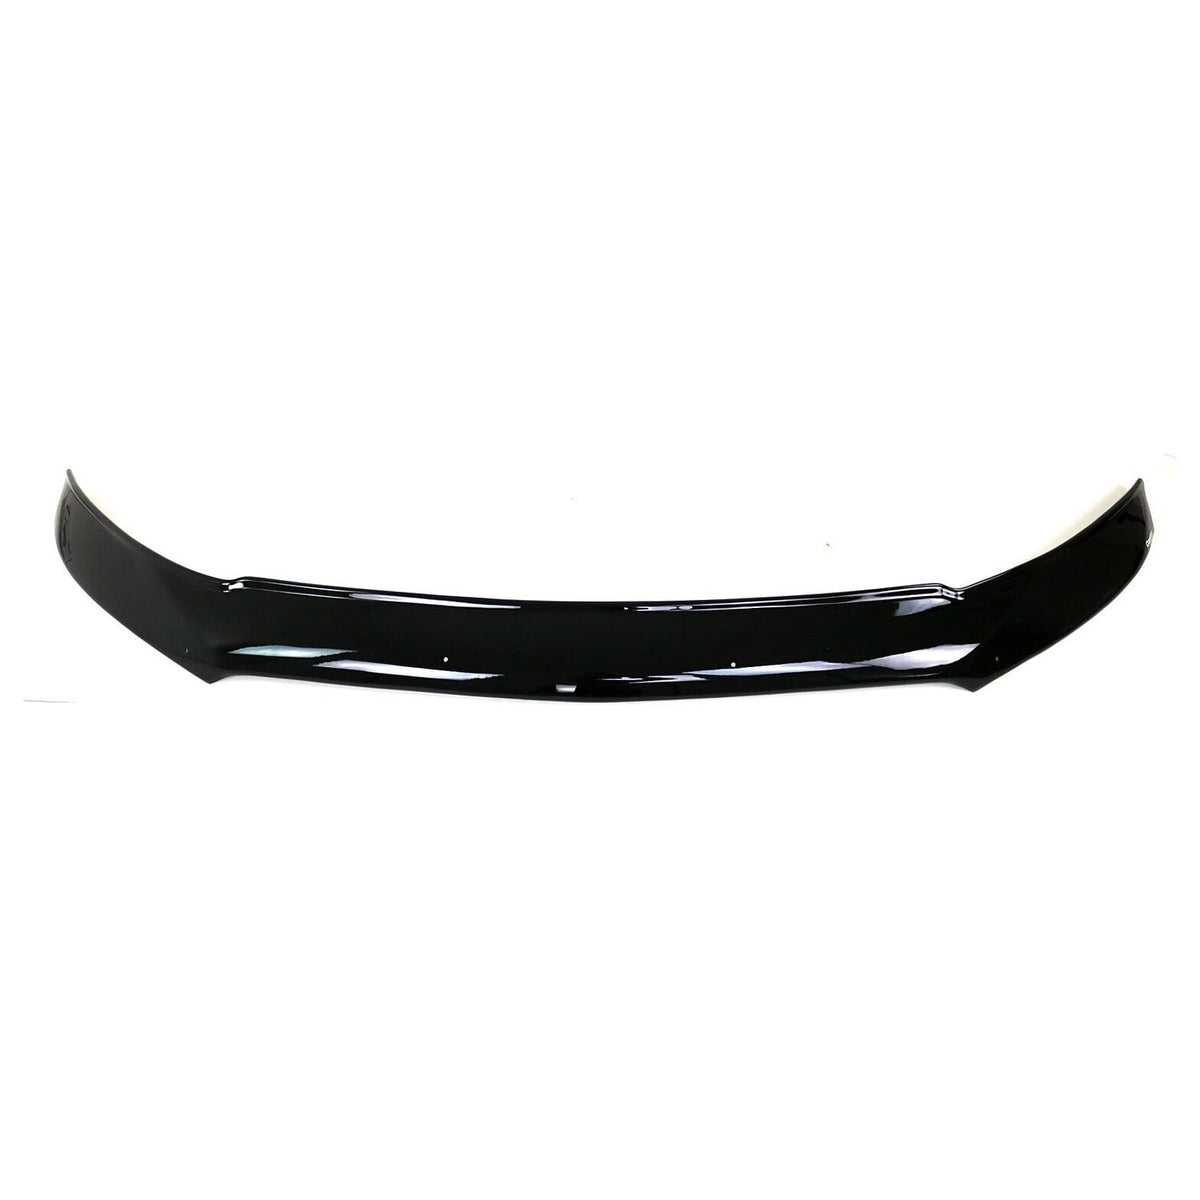 Bonnet deflector insect protection for Mercedes Sprinter 907 910 2018-24 Dark